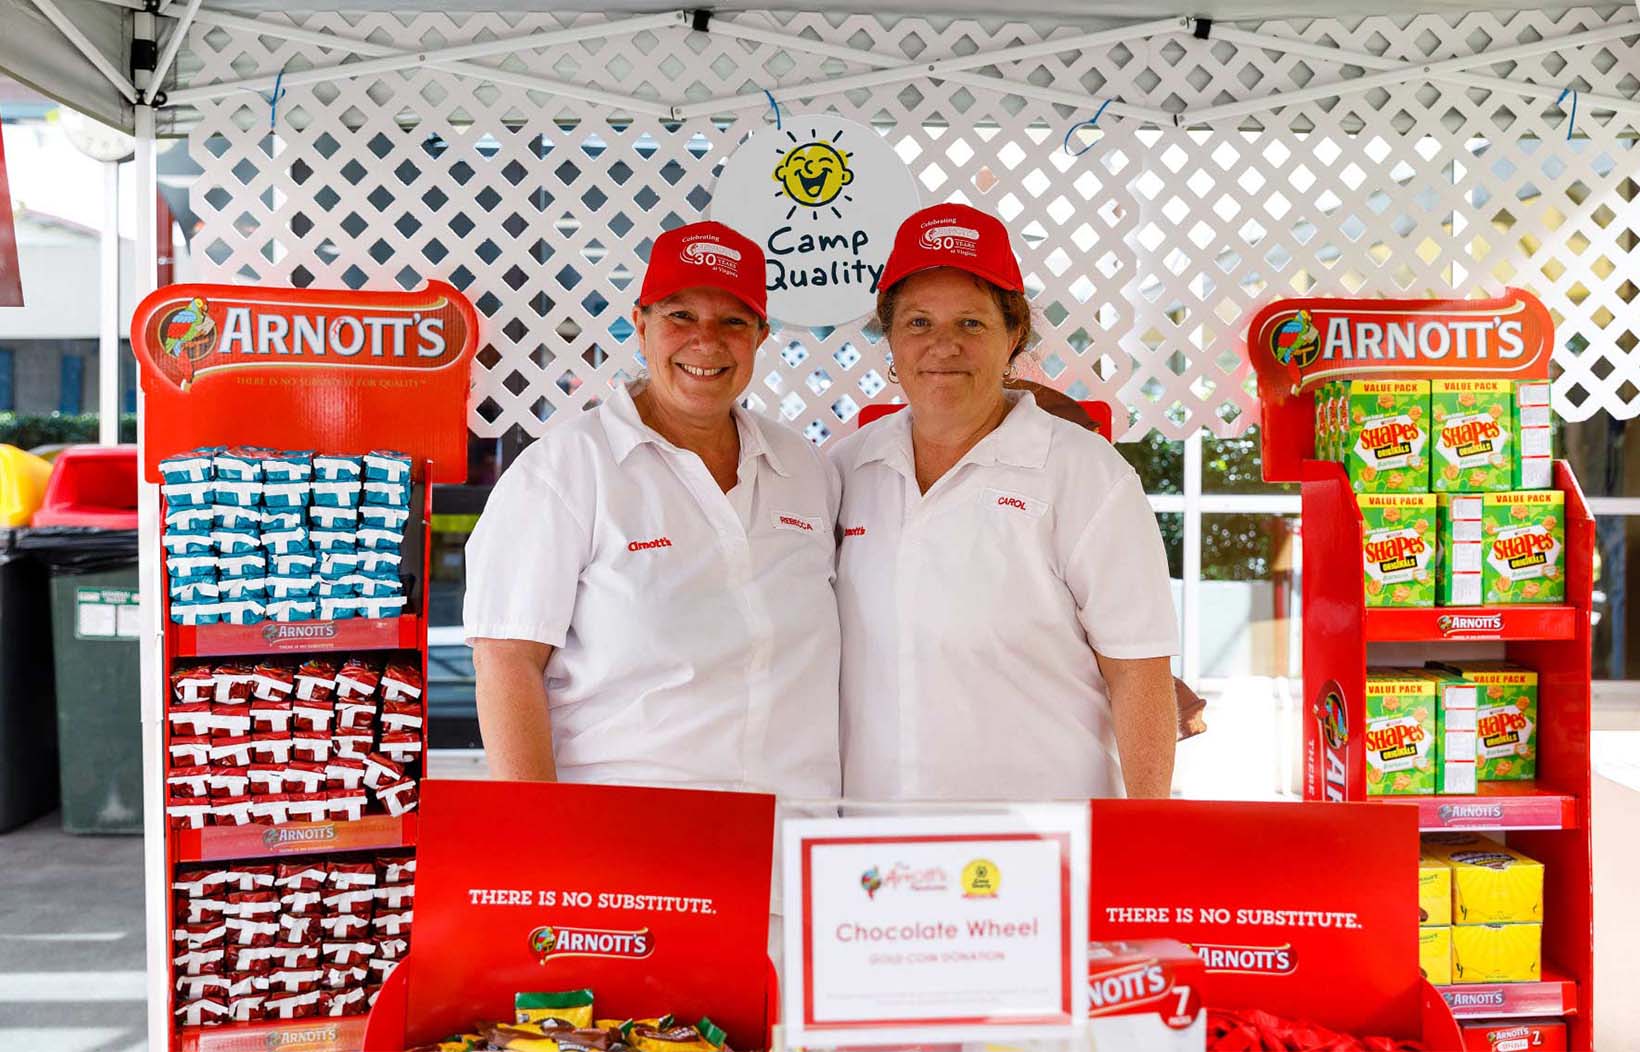 Arnott's and Camp Quality, ladies posing together